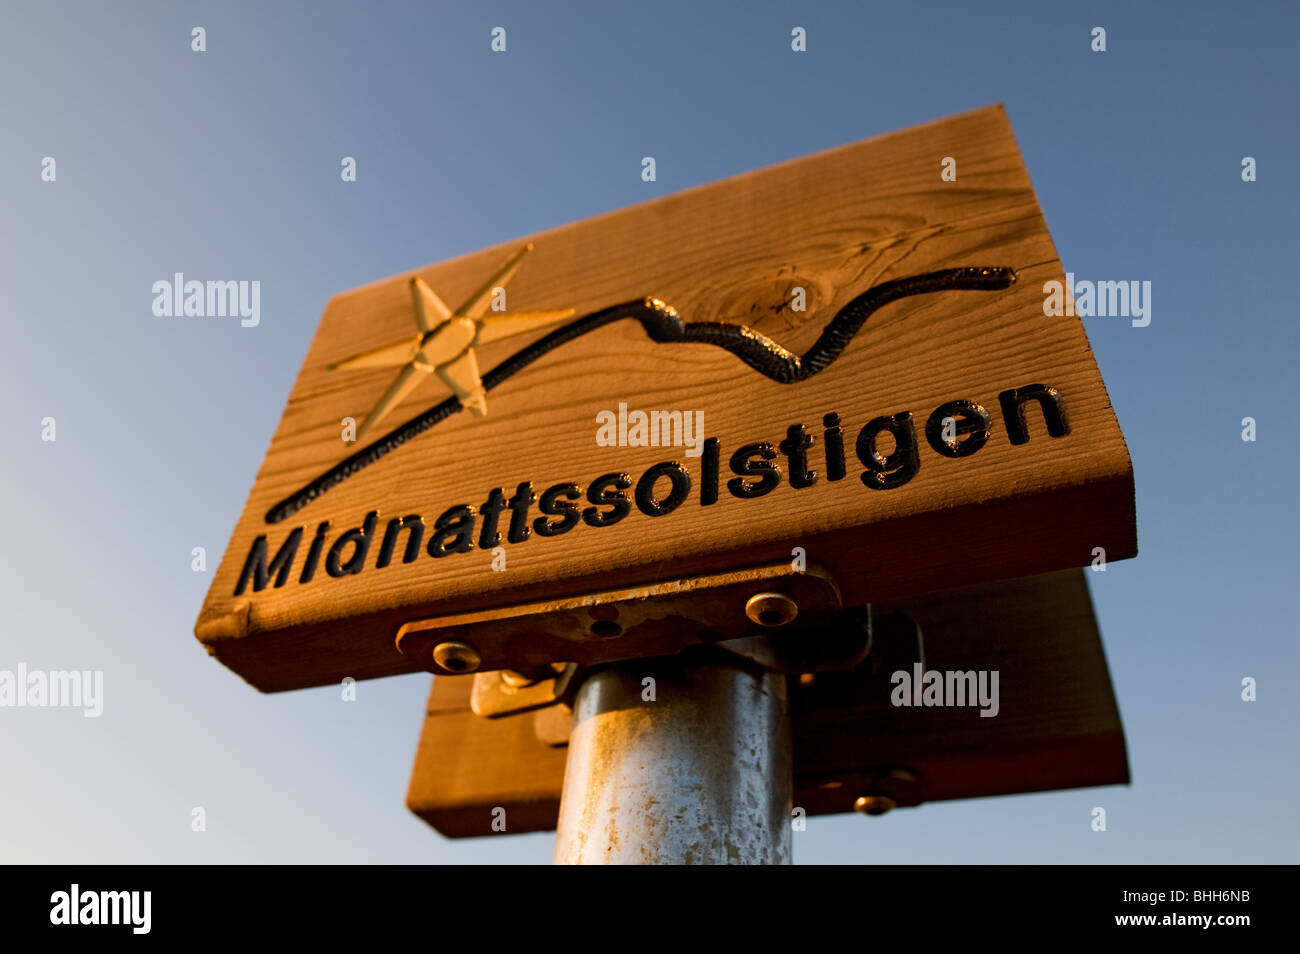 A wooden sign against the sky, Sweden. Stock Photo